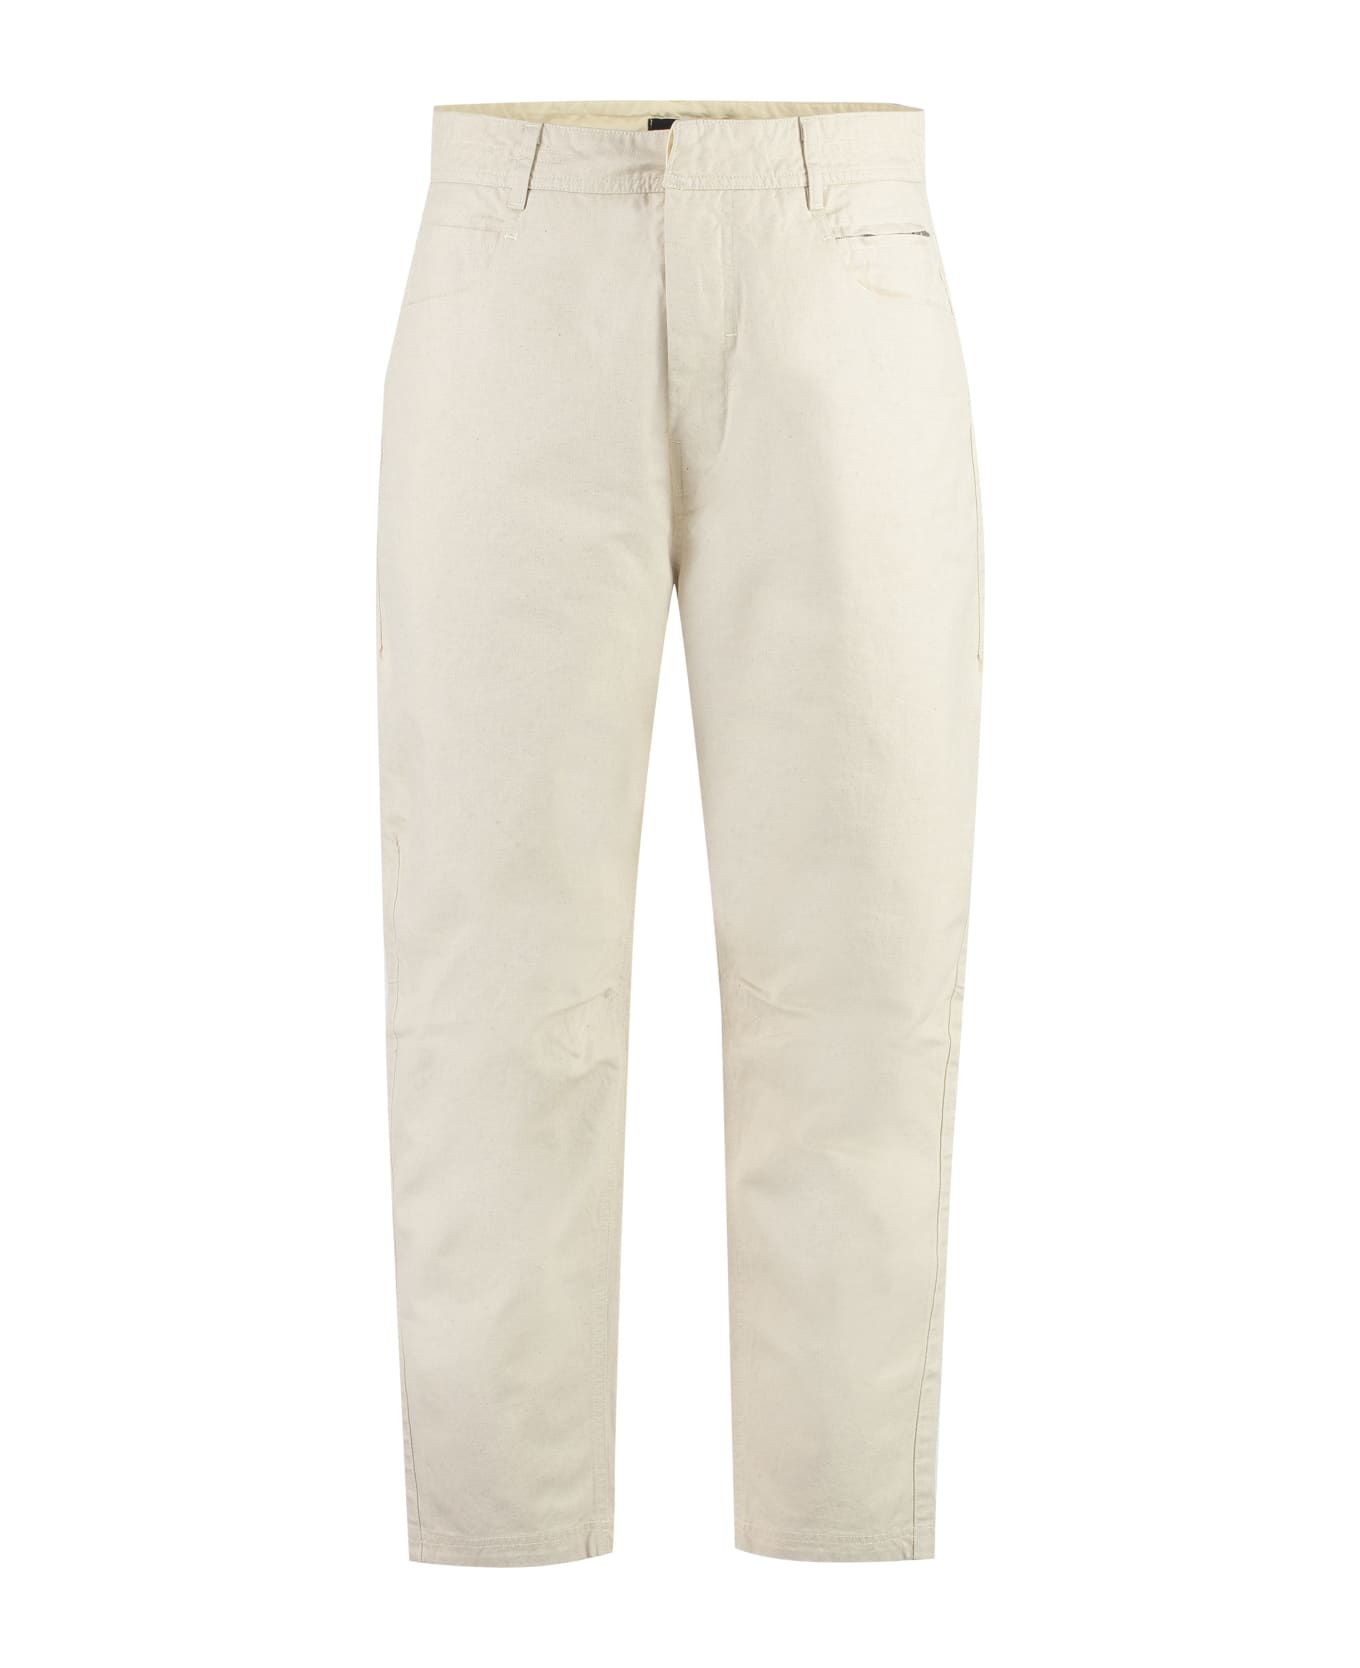 Stone Island Shadow Project Cotton Blend Slit Trousers - Sand